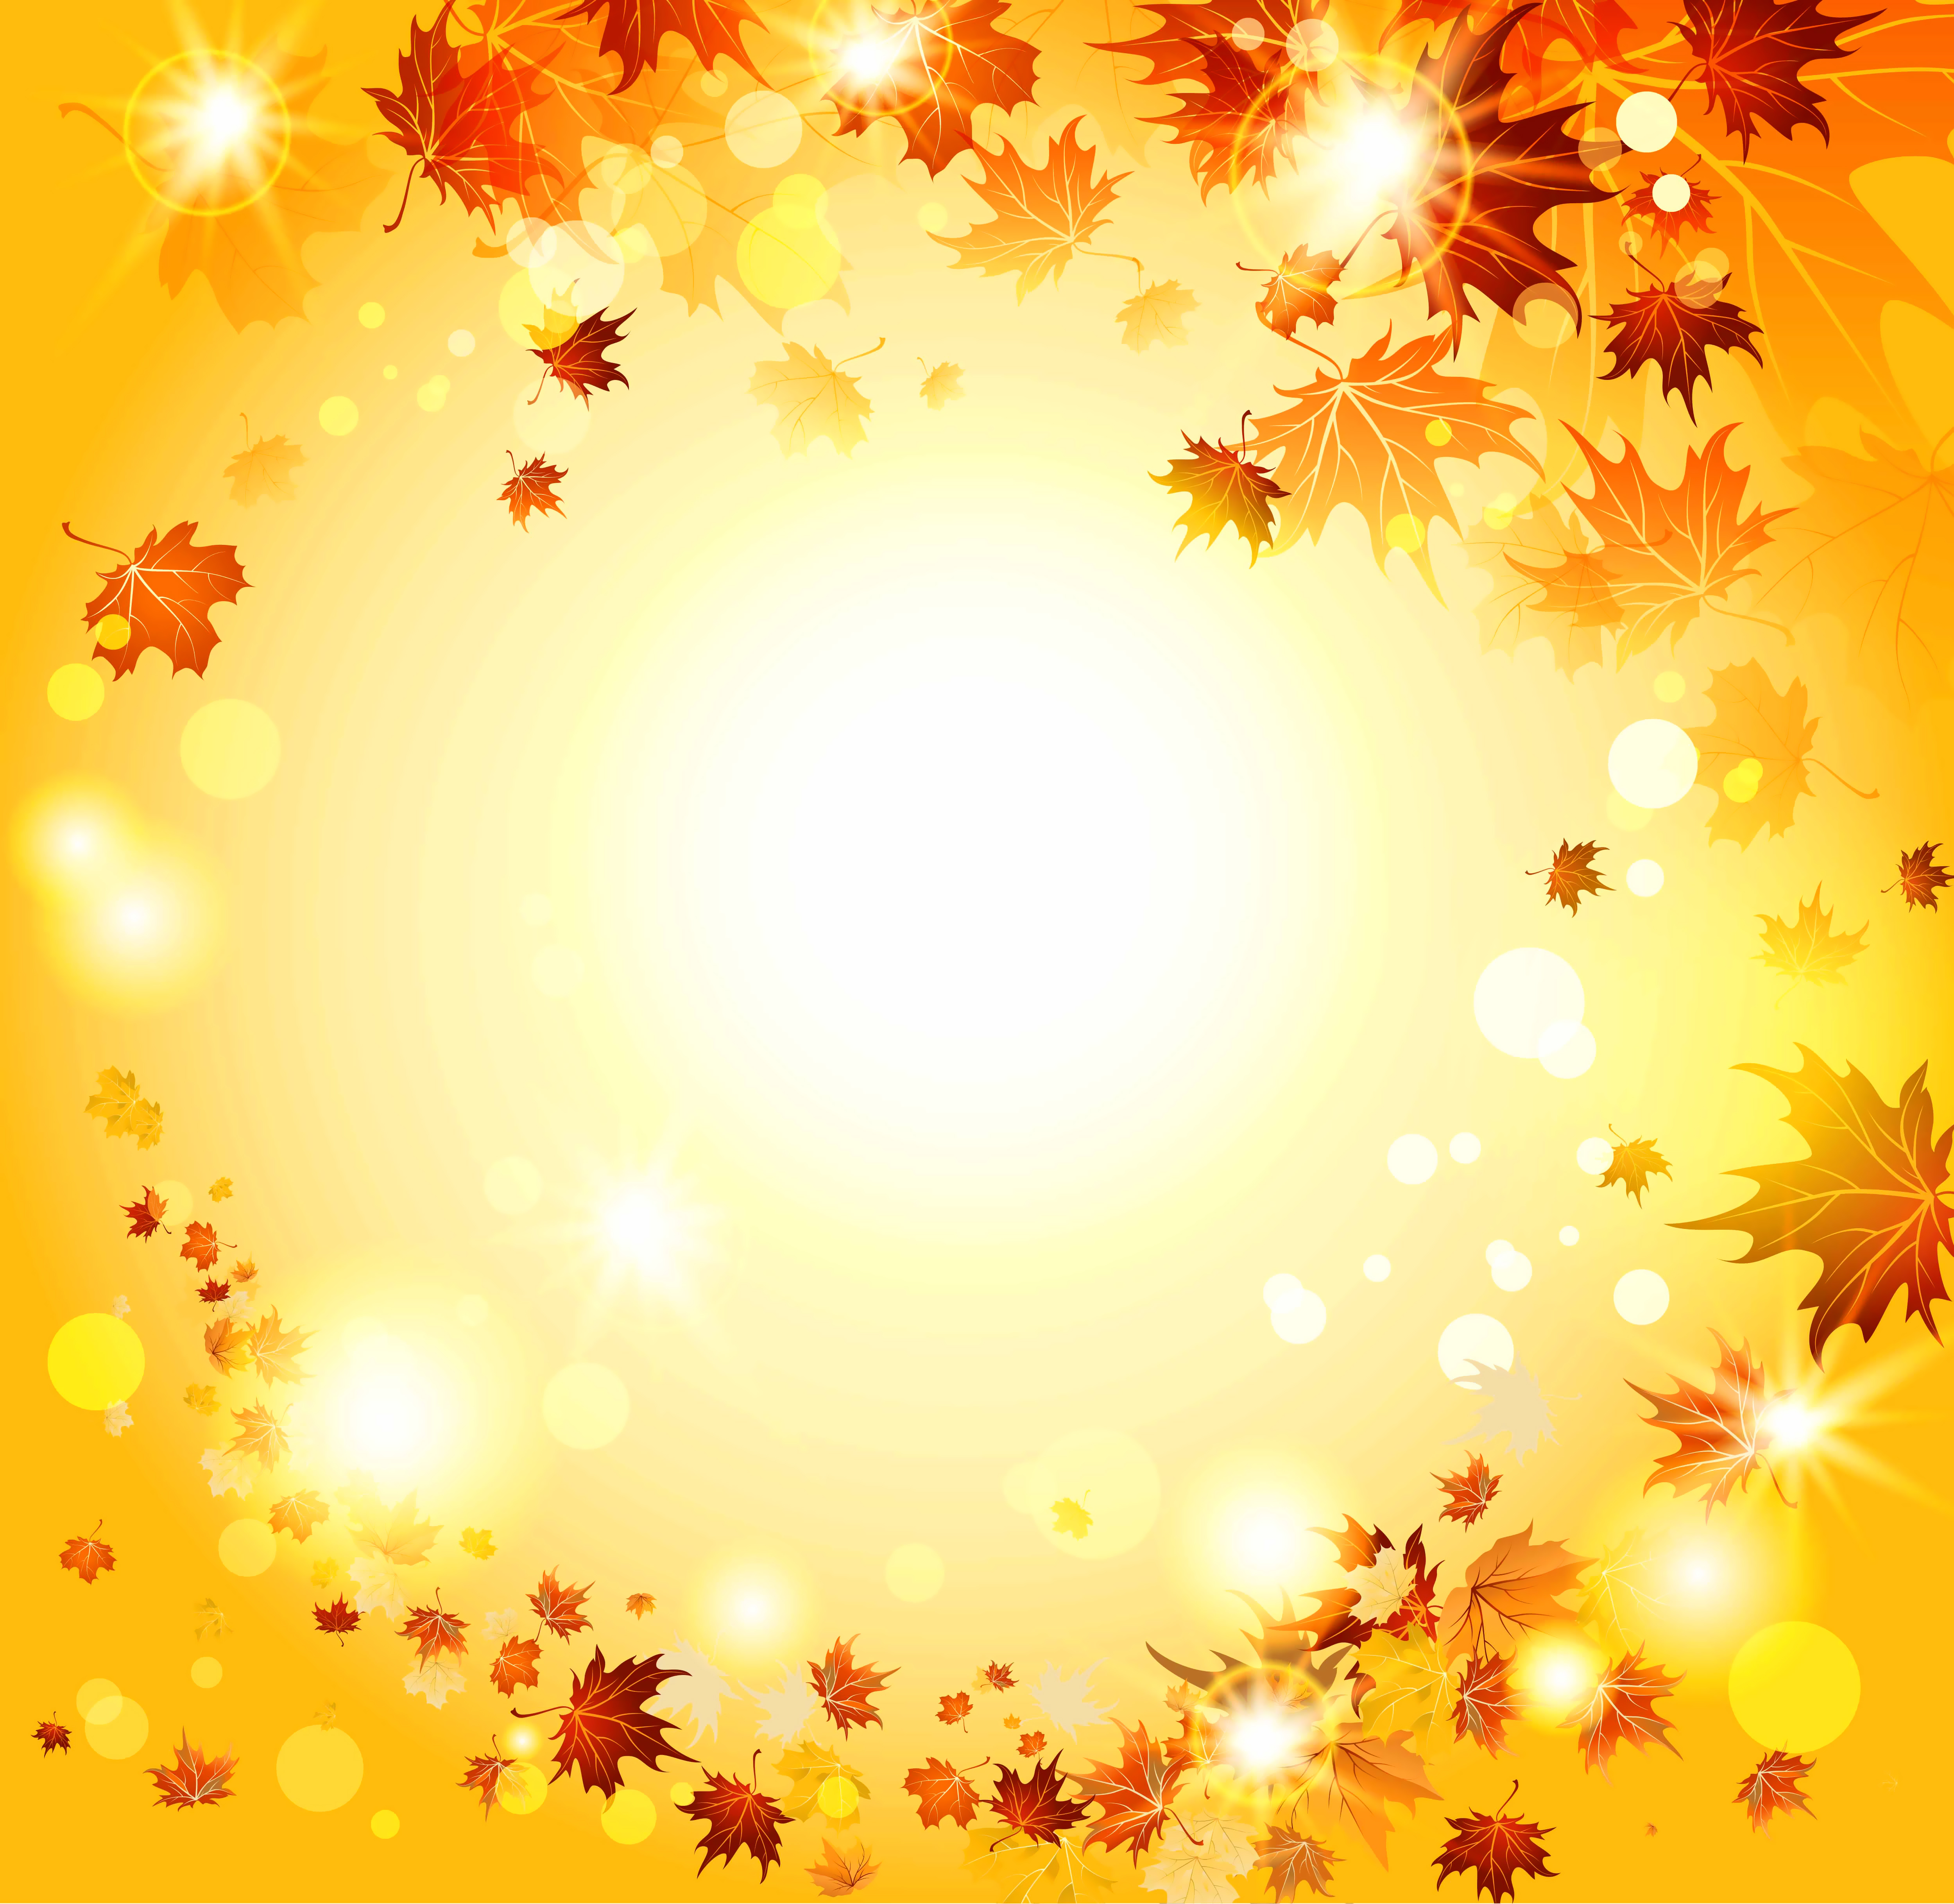 Fall_Background_with_Leaves.jpg?m=1411219860